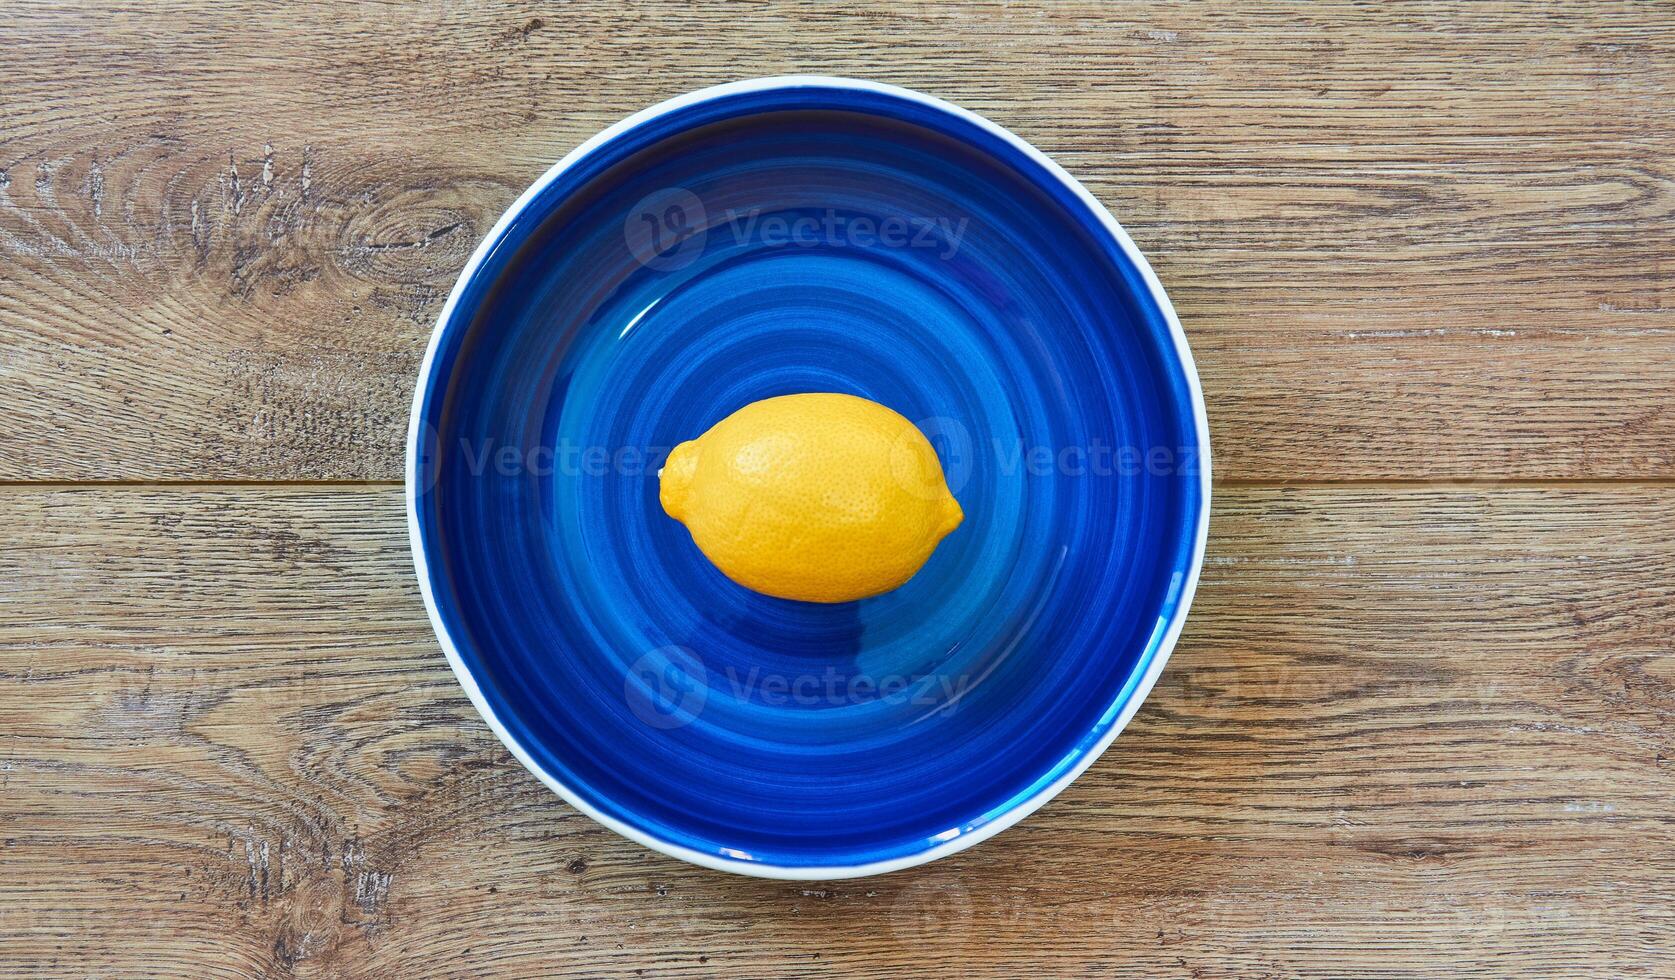 bright yellow lemon on a blue plate on a wooden tabletop photo